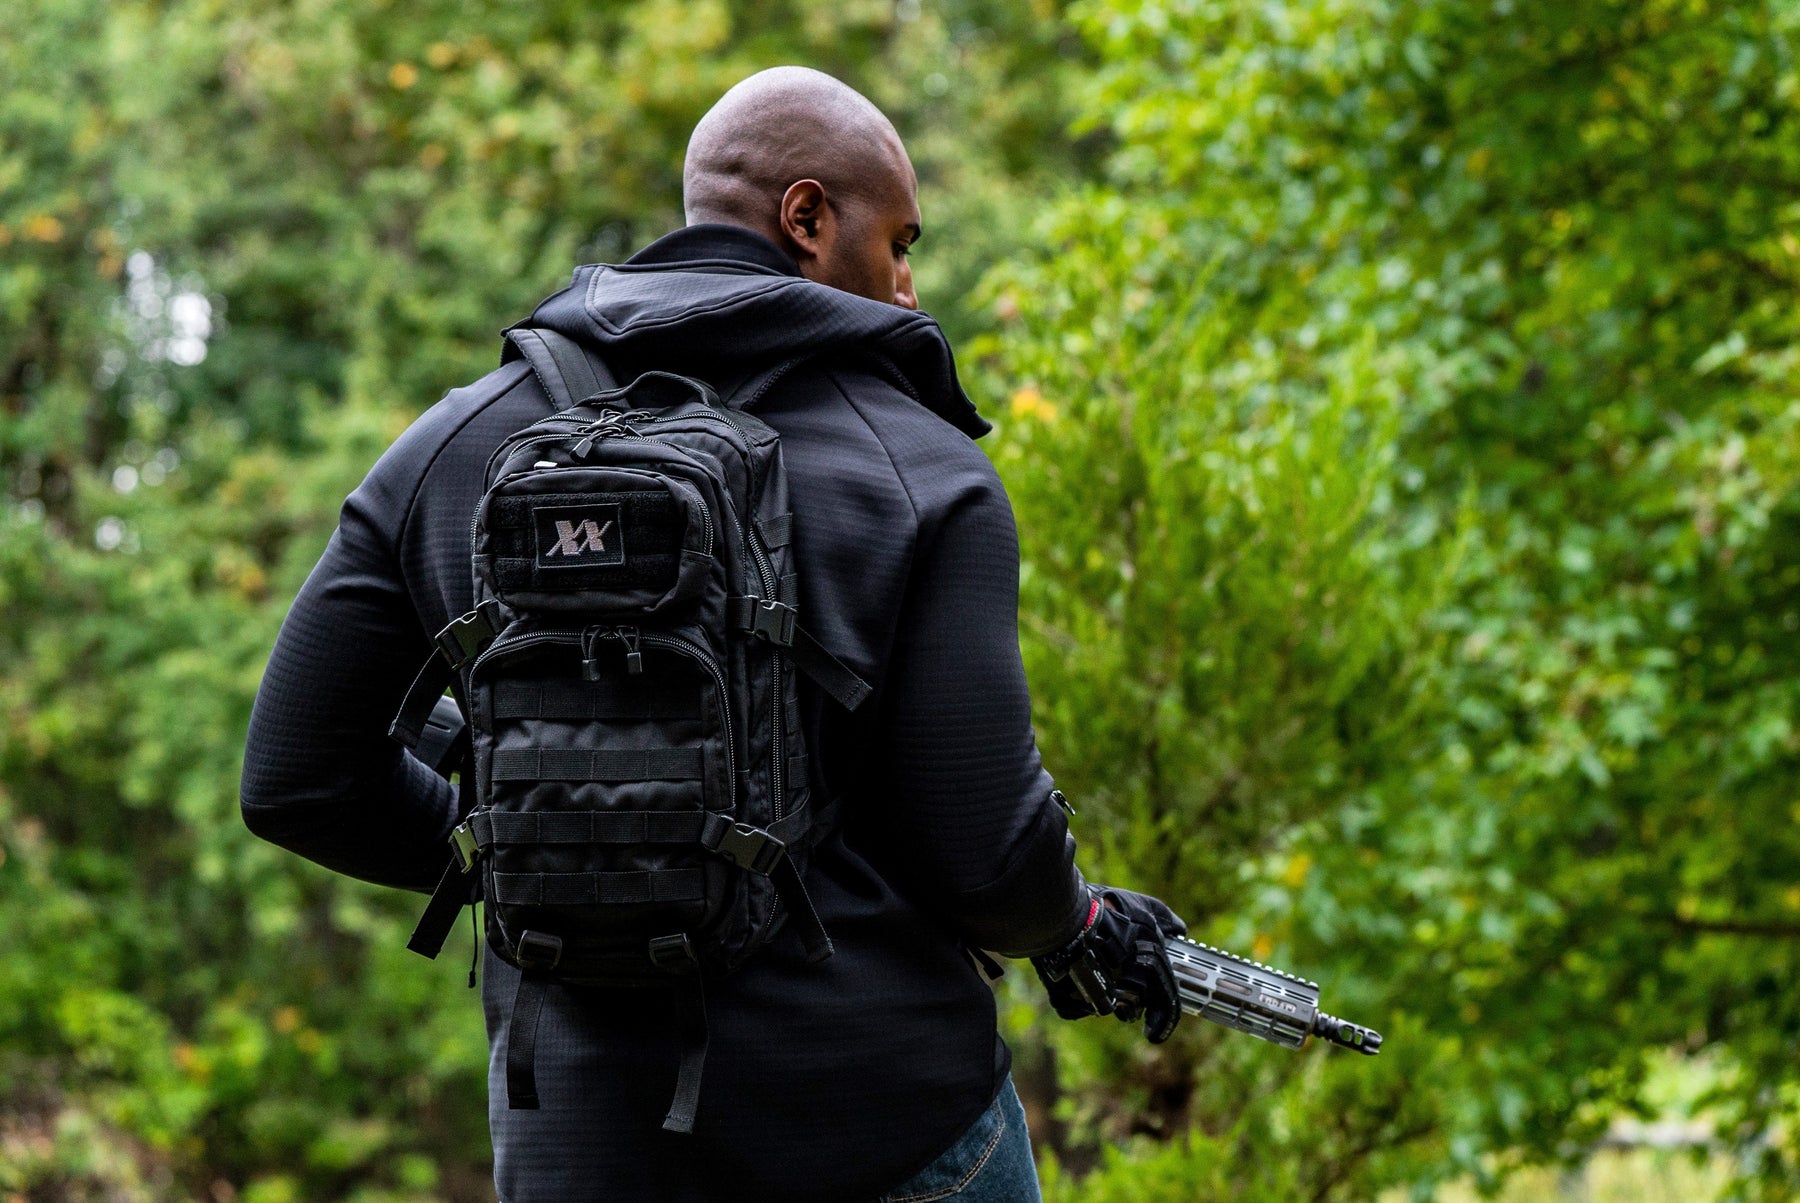 Gear Up With The Ultimate Assault Pack - Our New Backpack For Your Tactical Gear